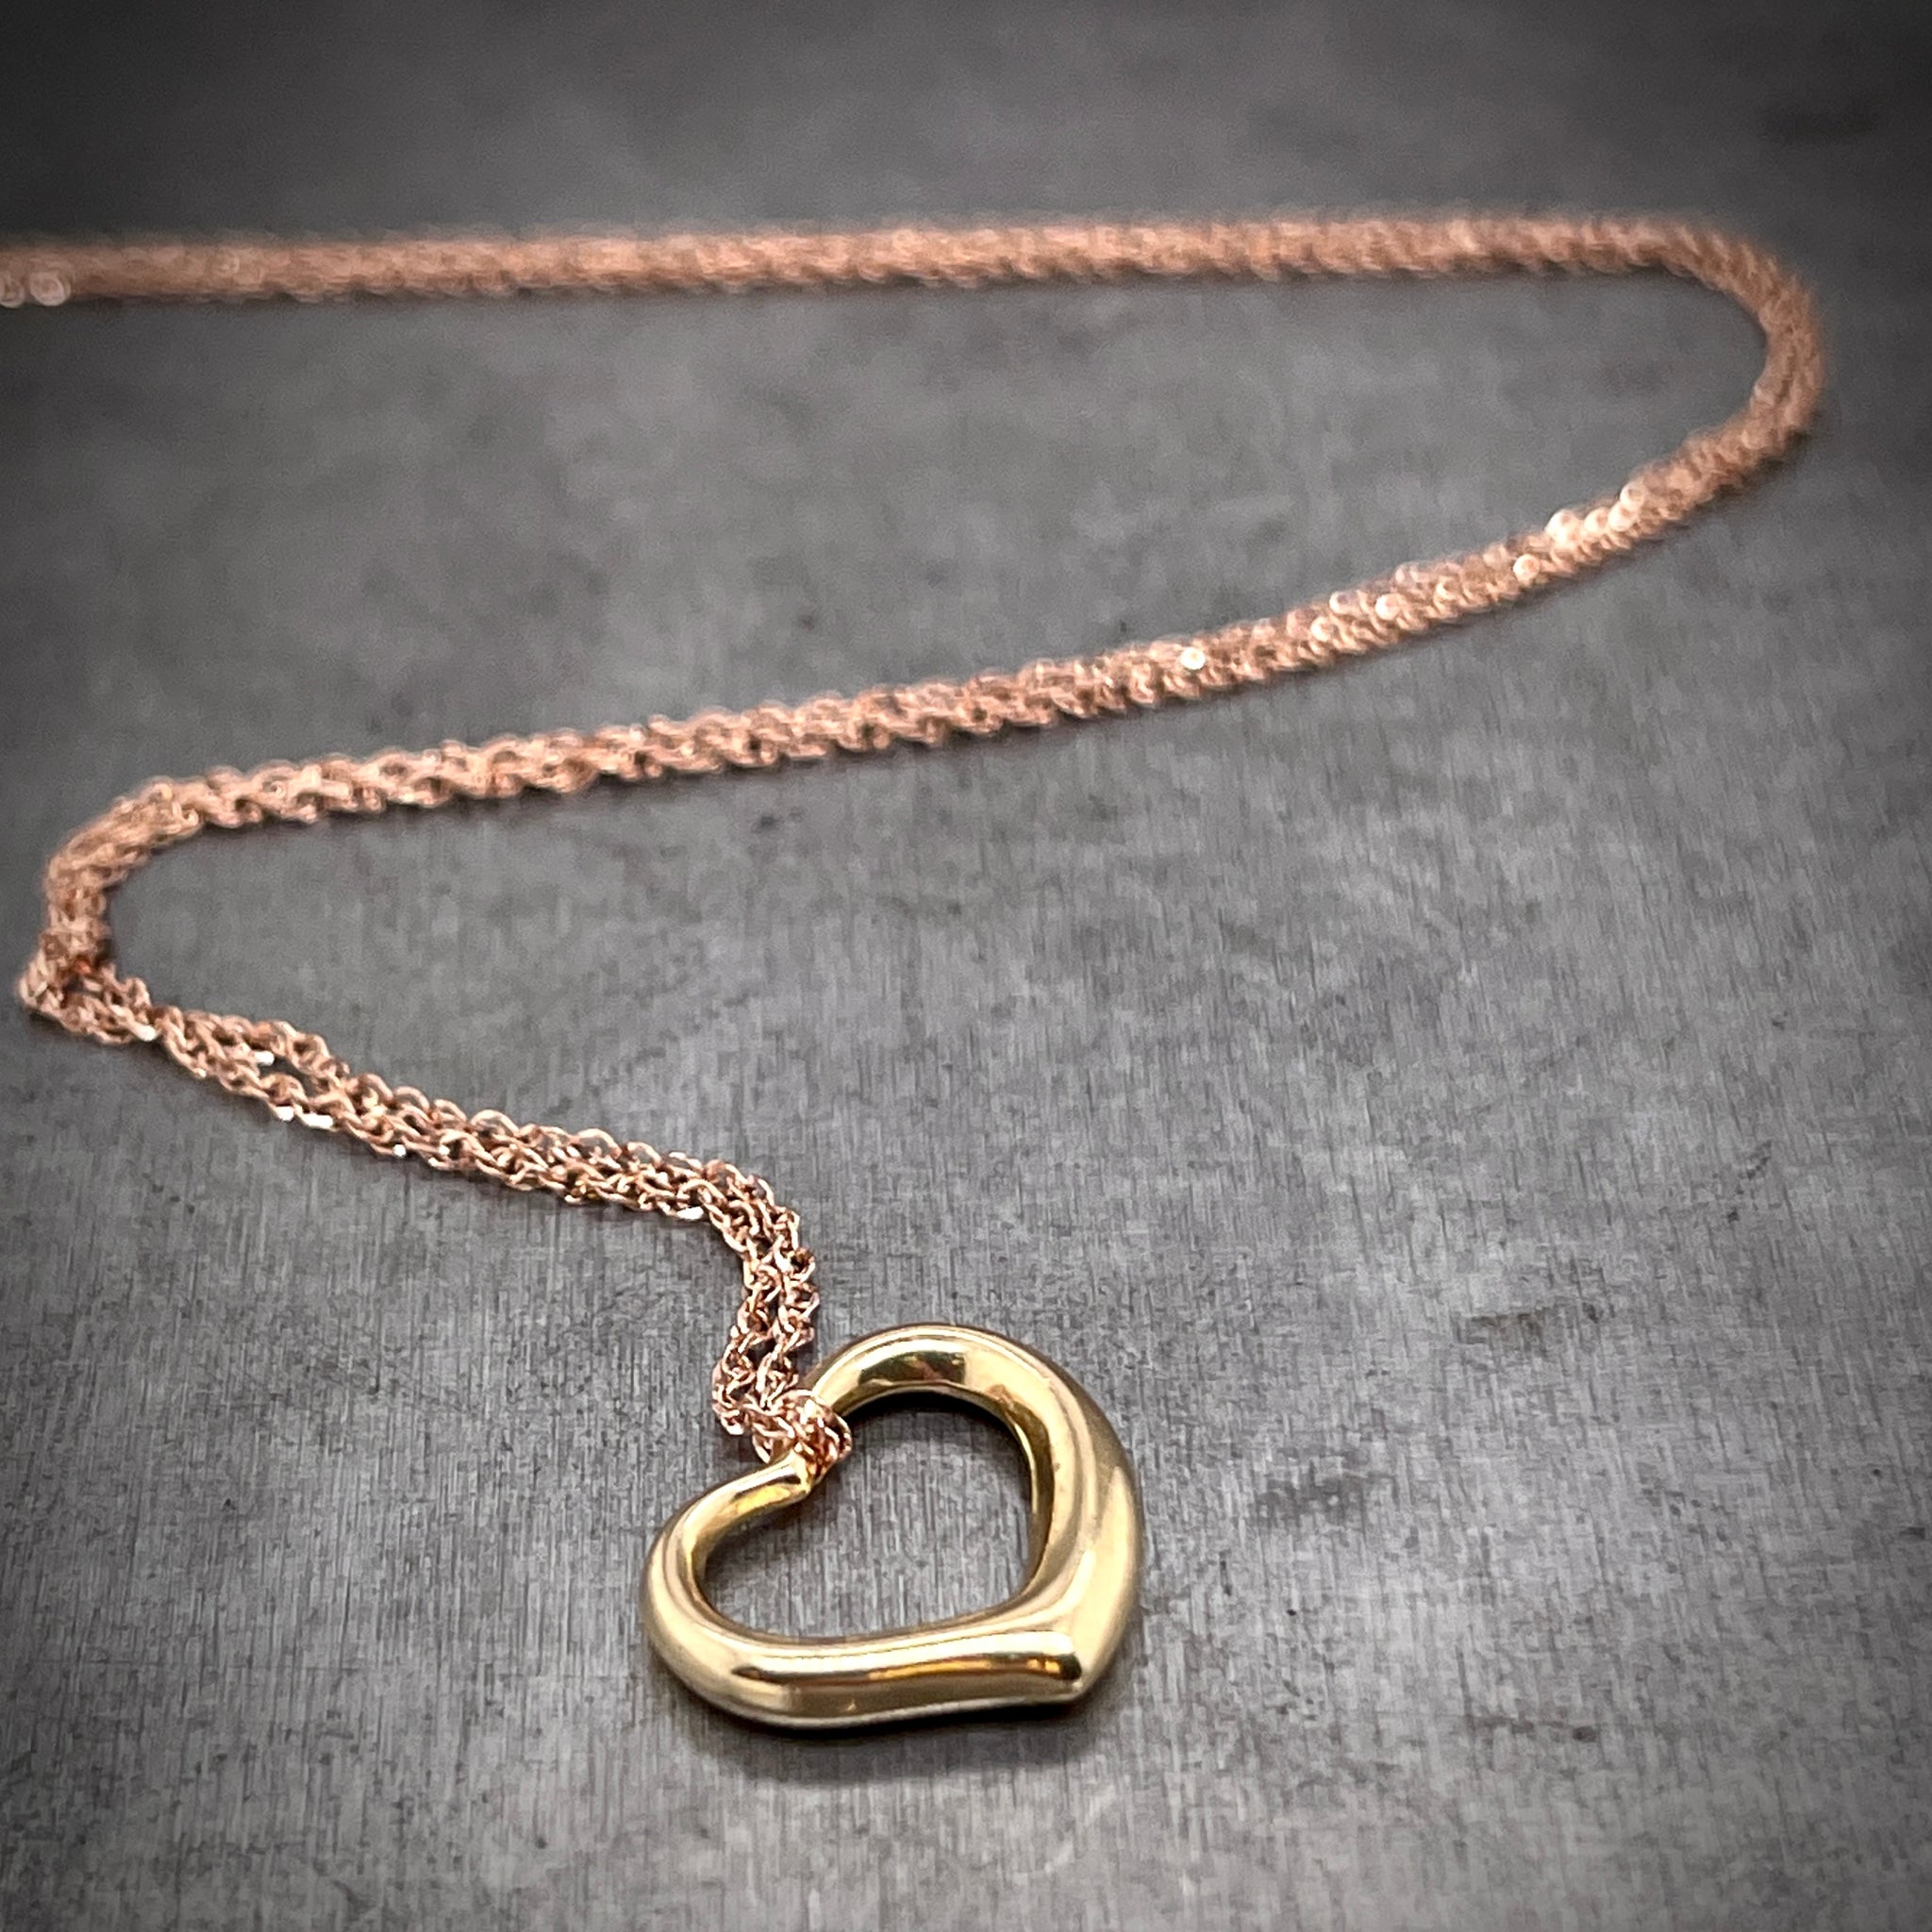 Yellow heart pendant and rose gold chain features laying down with the chain twisting in the background.